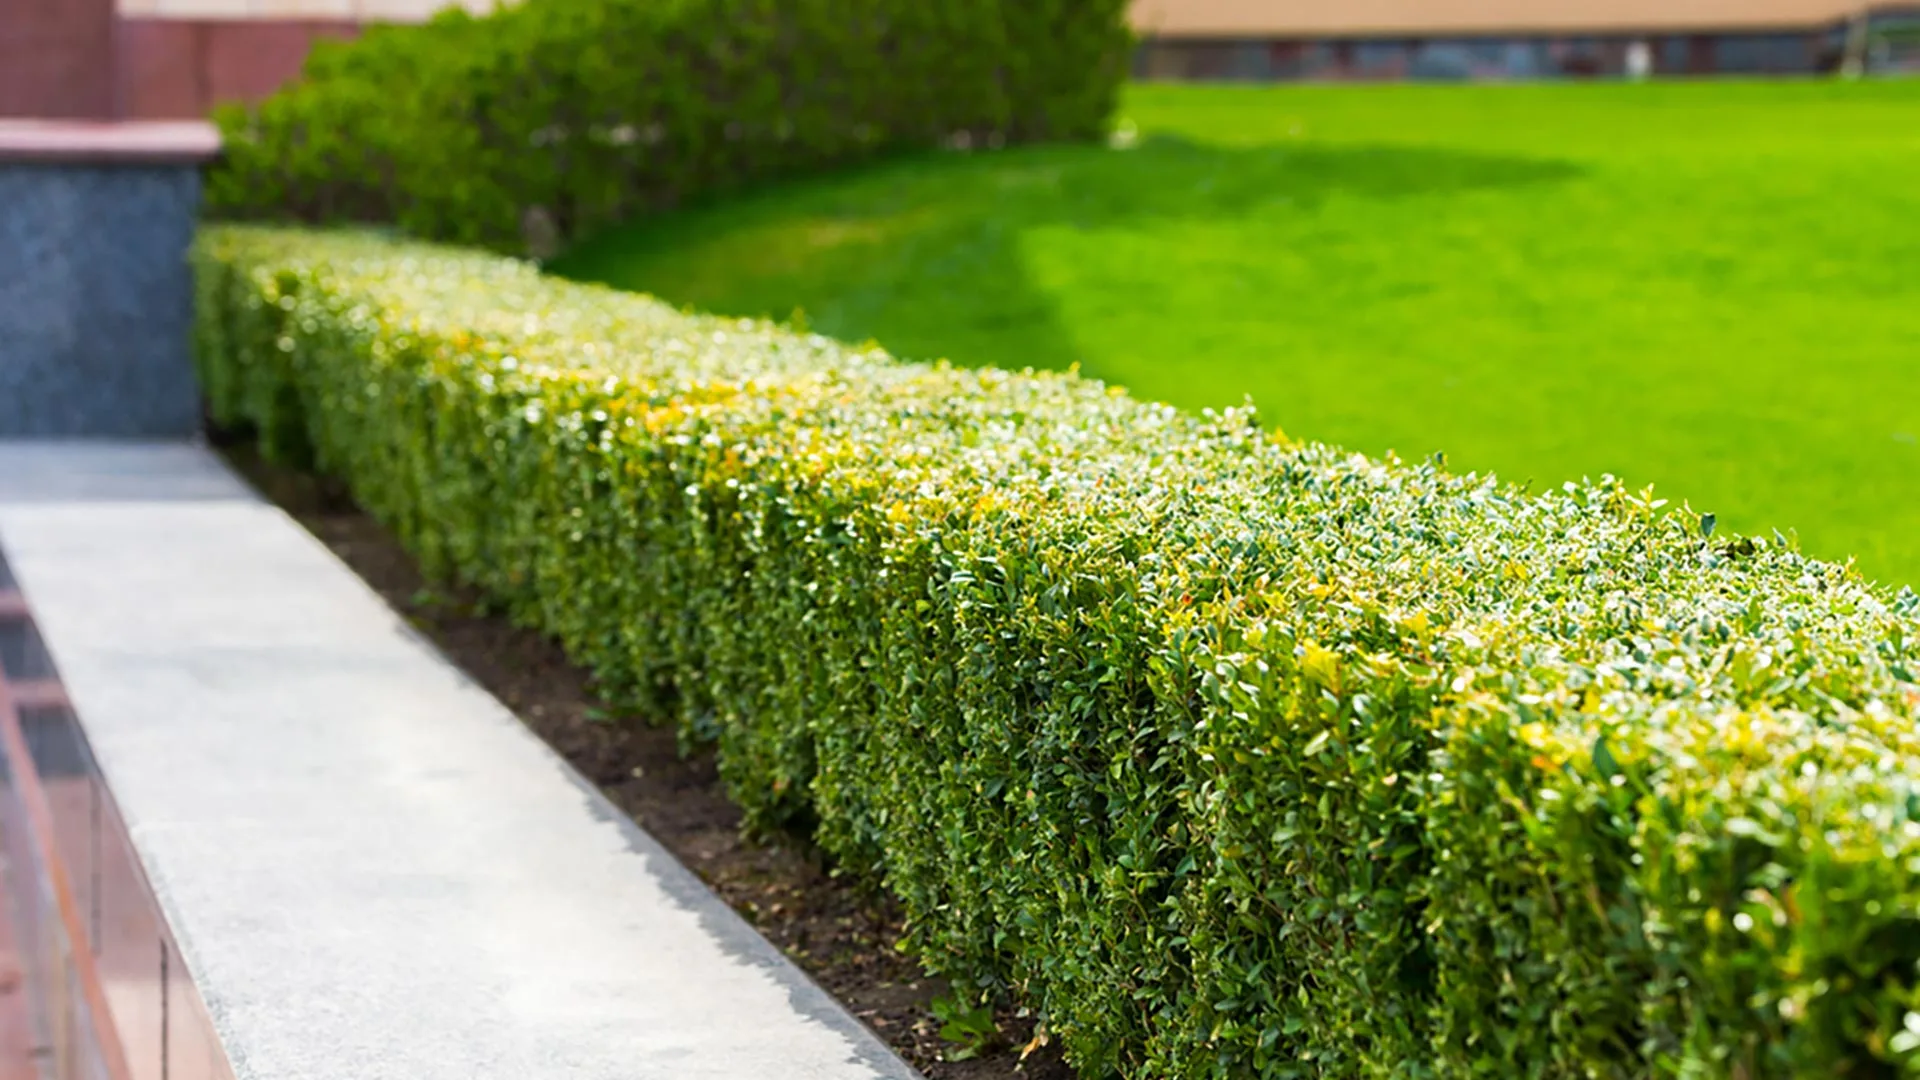 Trimmed shrubs in a commercial property in Urbandale, IA.